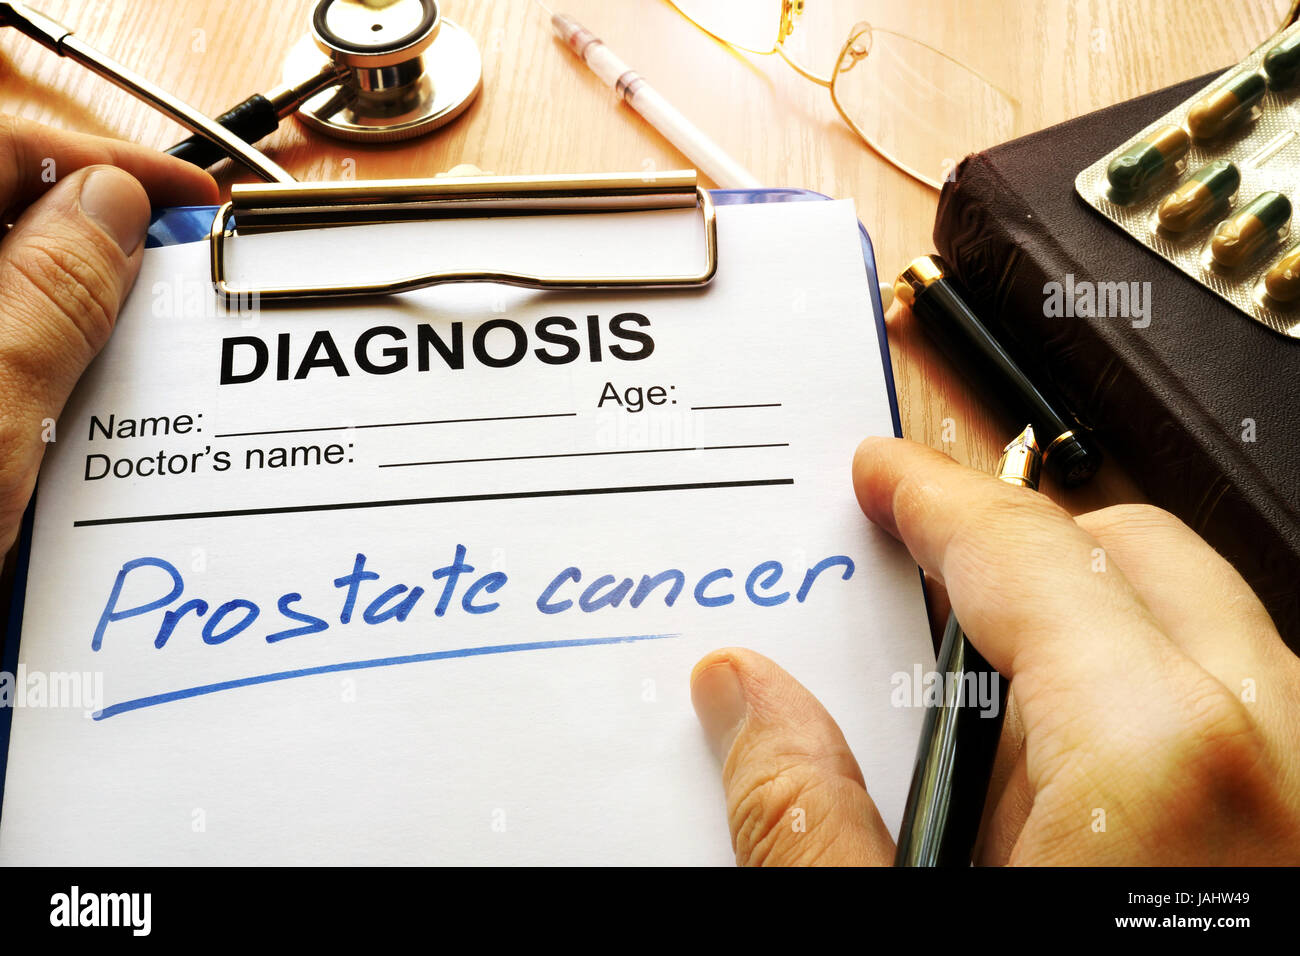 Prostate cancer diagnosis on a medical form. Stock Photo